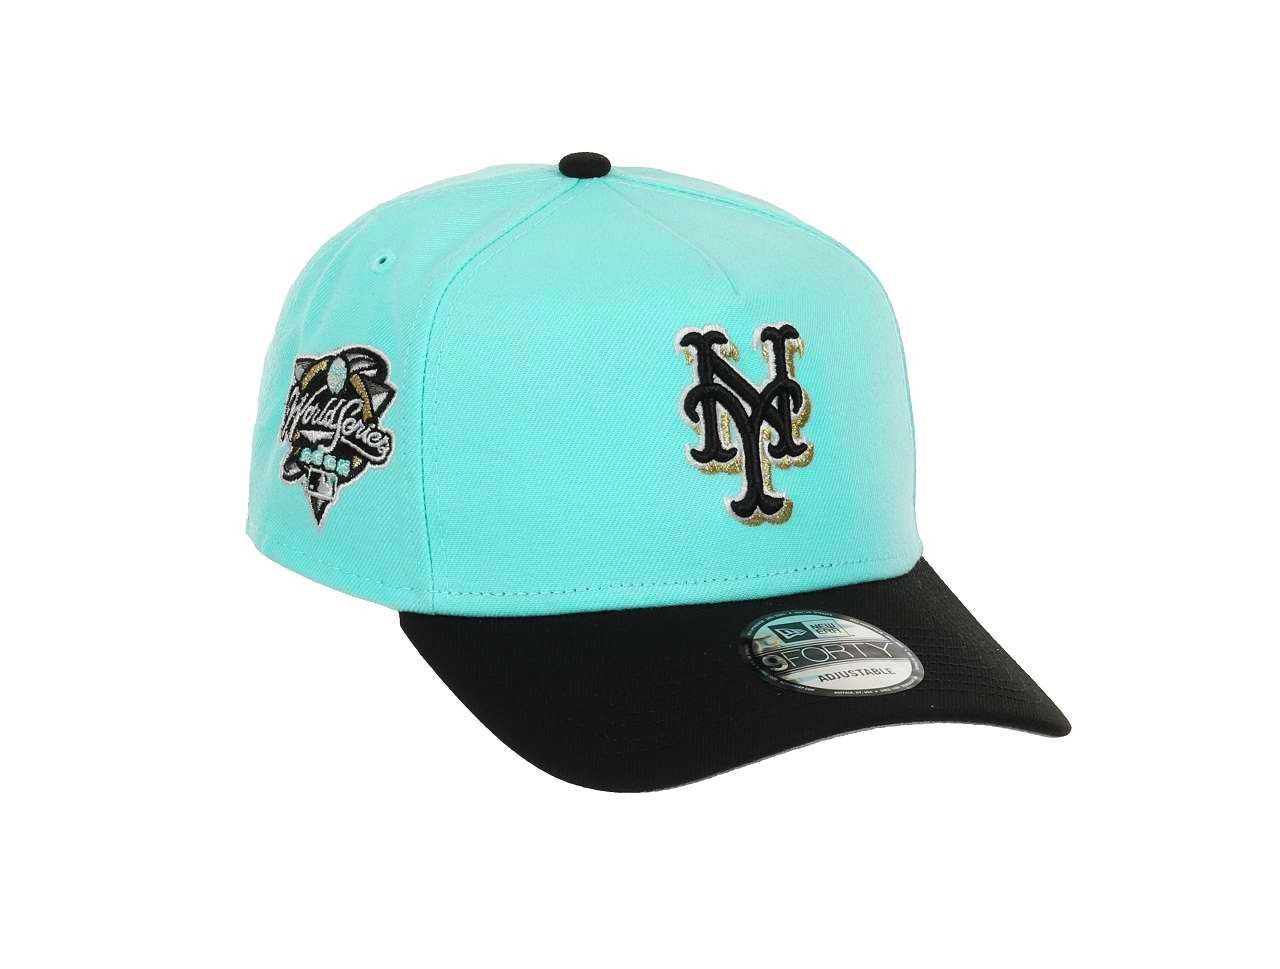 New York Mets MLB World Series 2000 Sidepatch Coowperston Mint Black 9Forty A-Frame Snapback Cap New Era